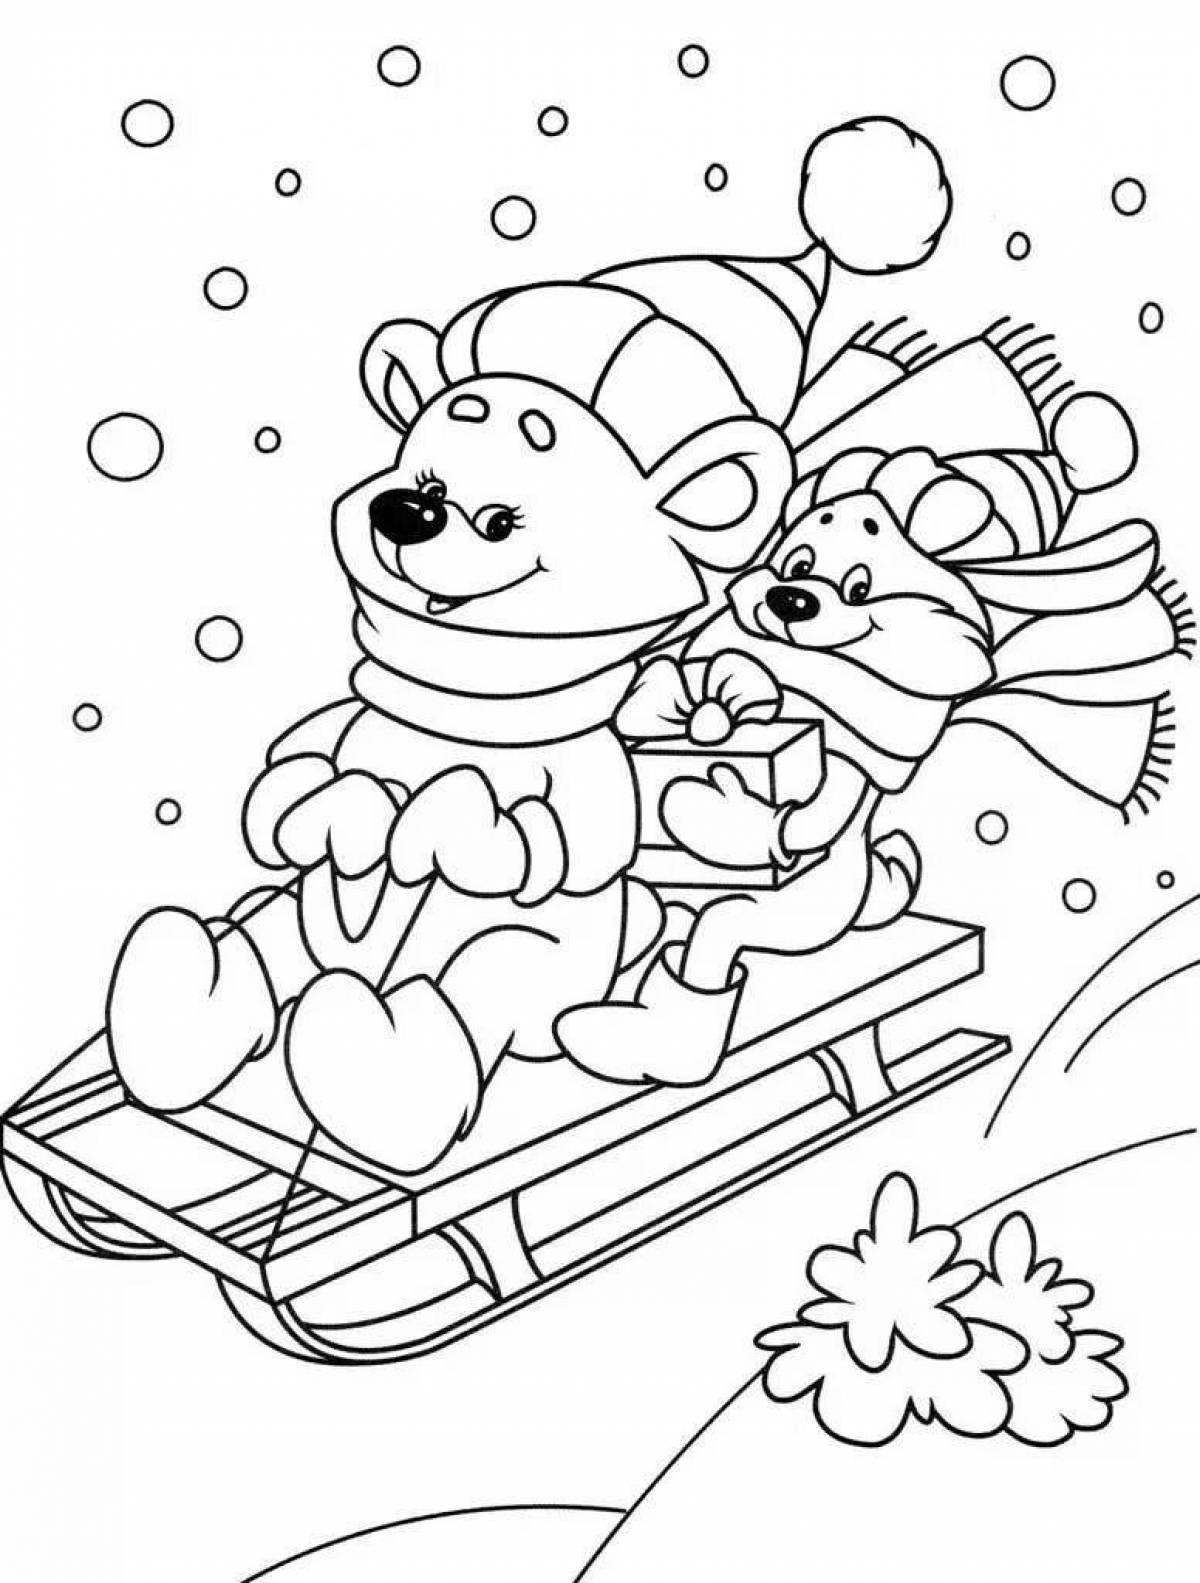 Exquisite 5 year old winter coloring book